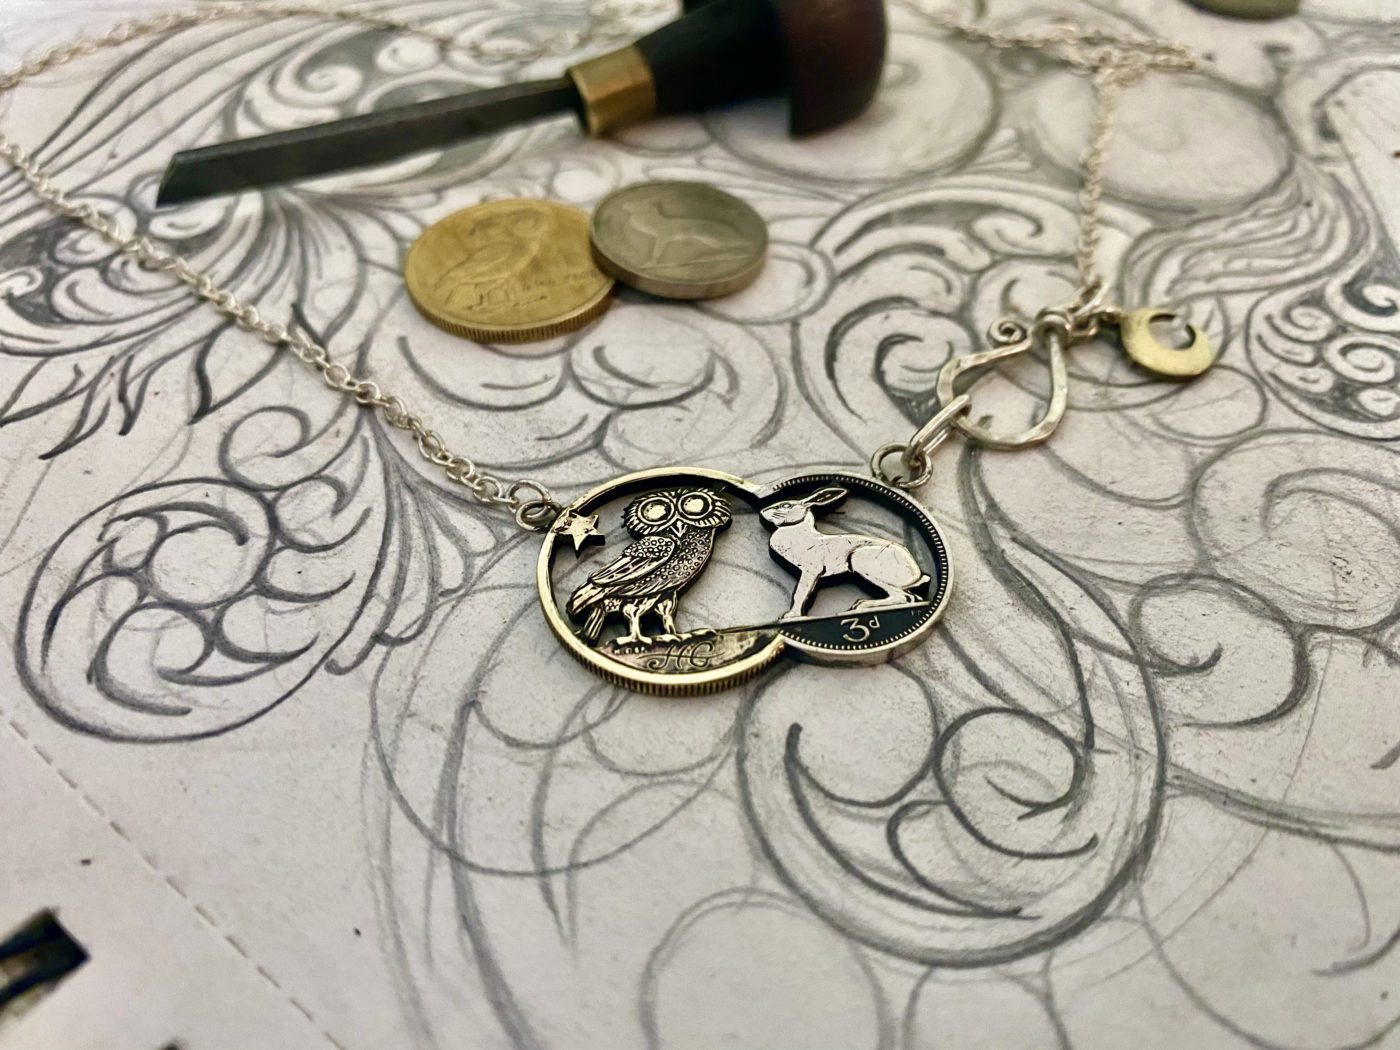 hare-y-gr-owl-er owl and hare coin fusion necklace